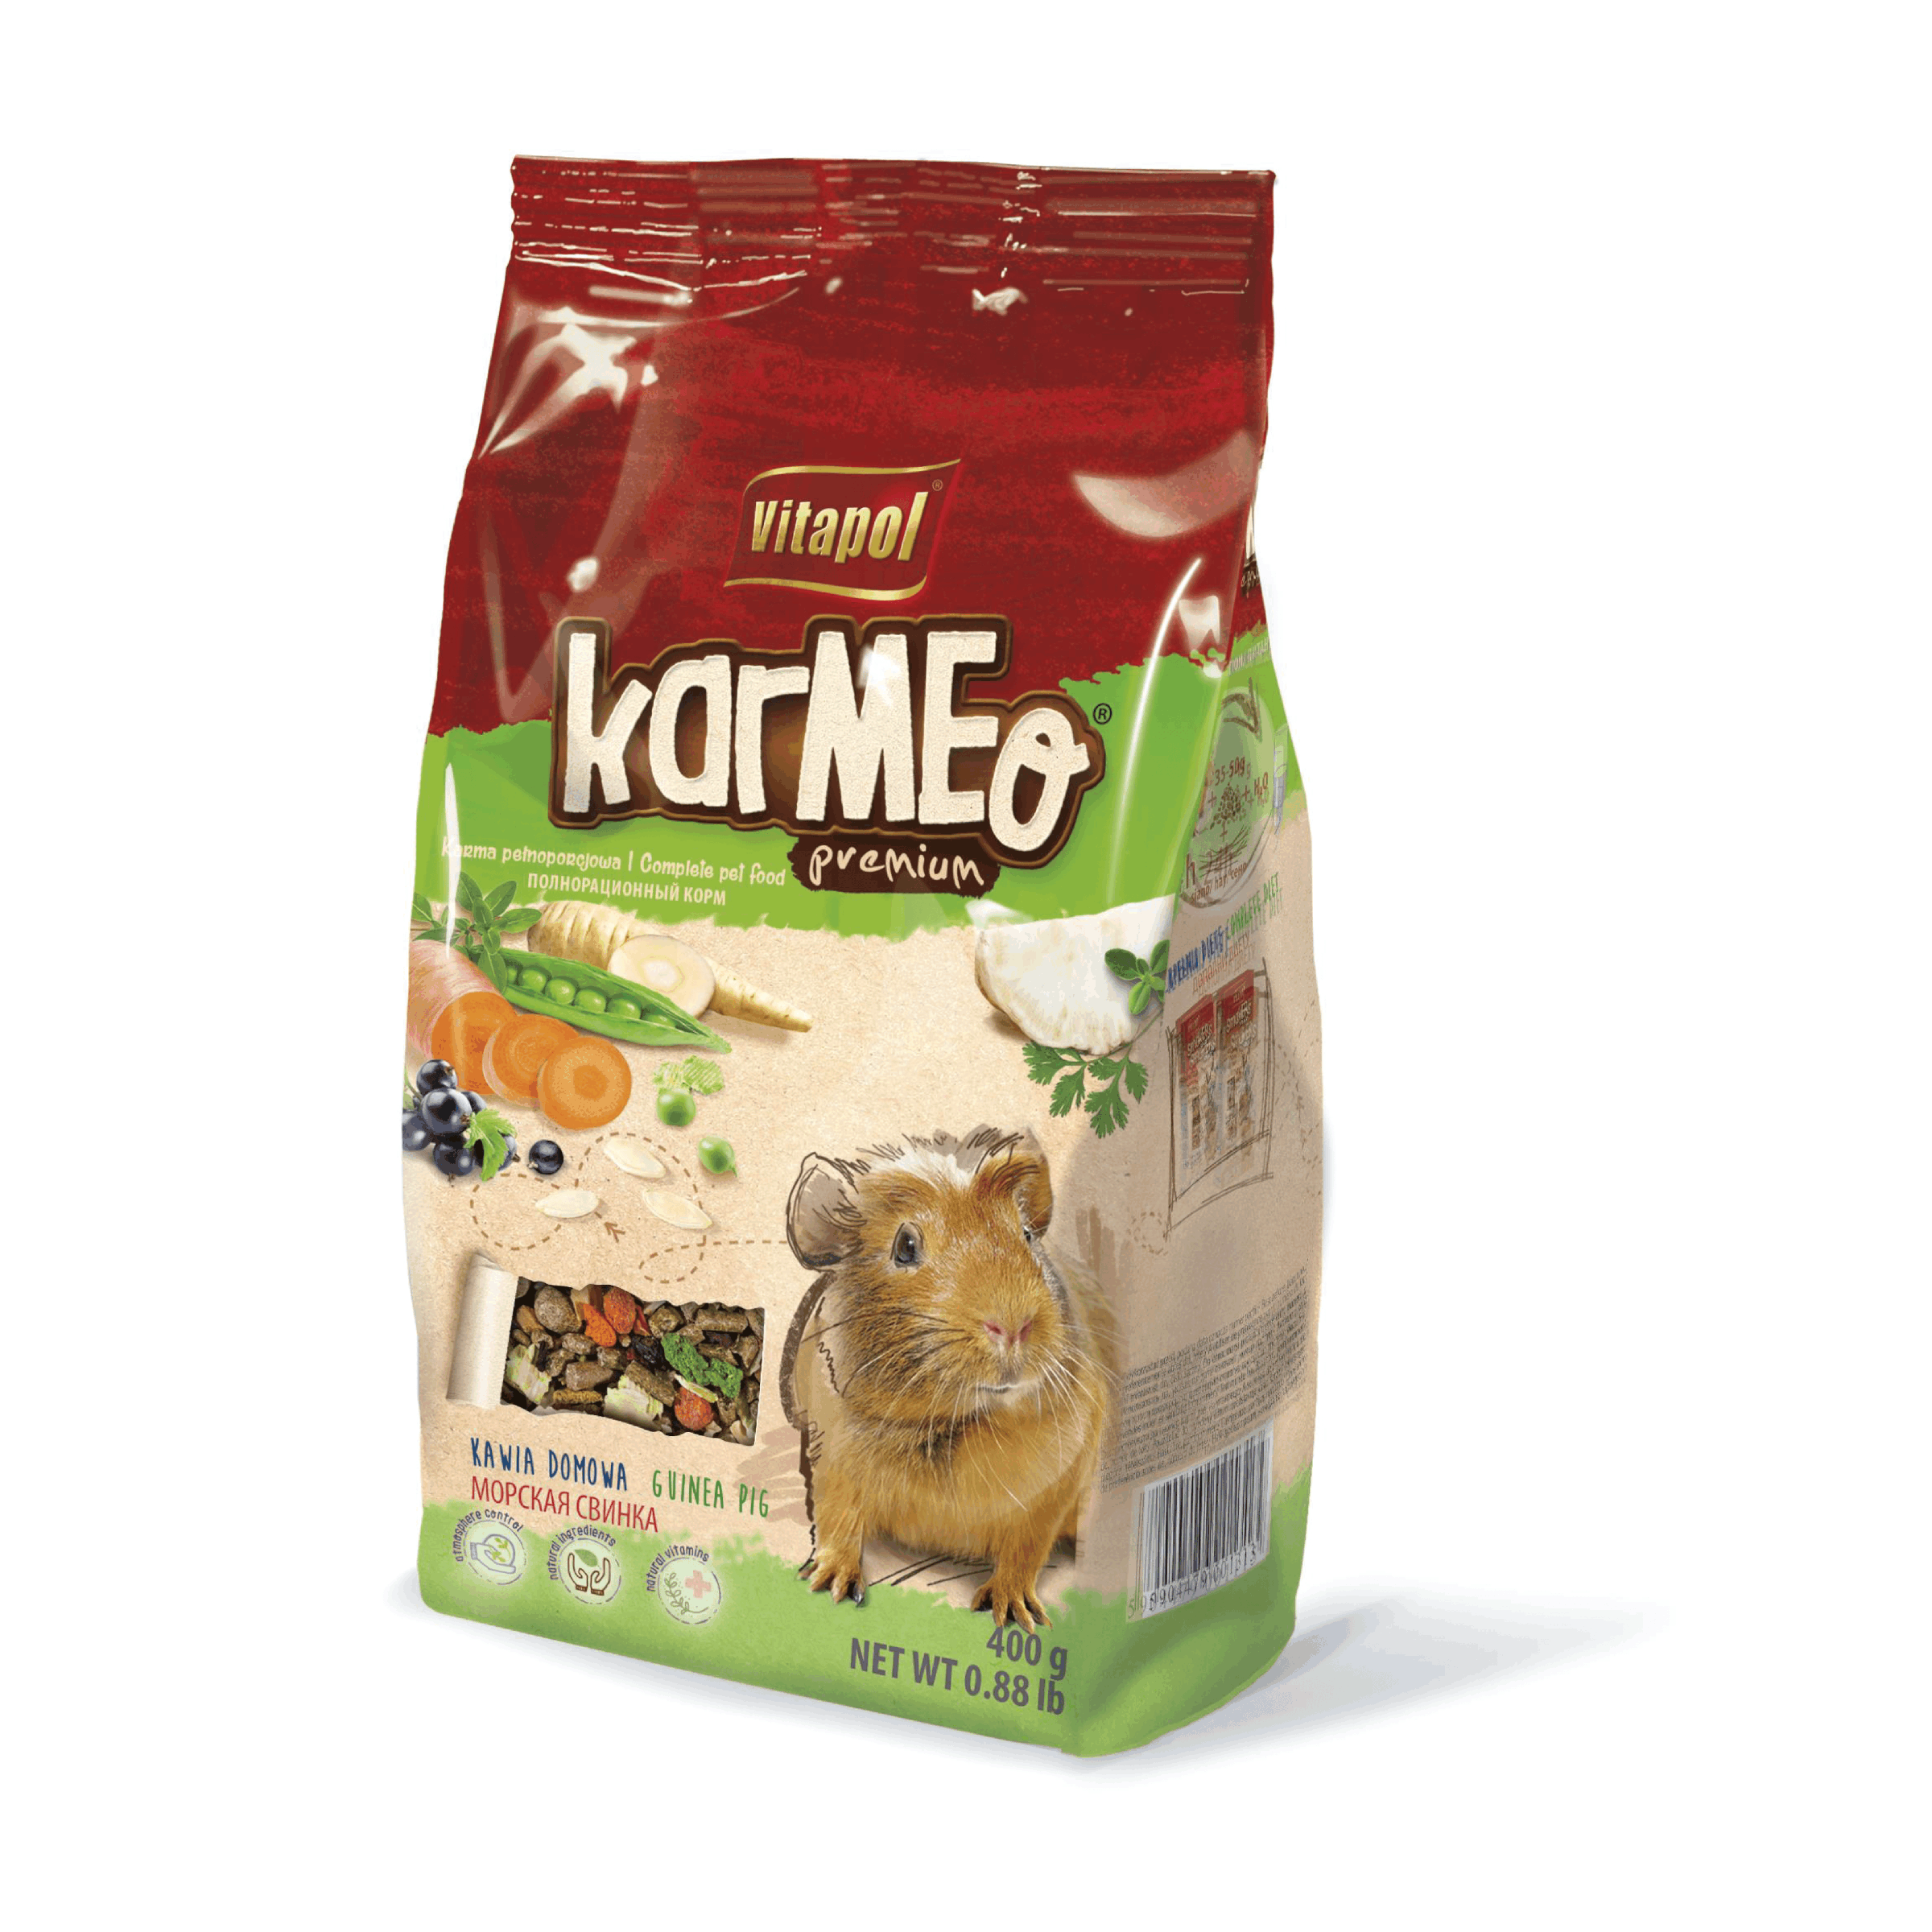 Vitapol Karmeo Small Animal Food For Guinea Pig 400g (Pack of 2)